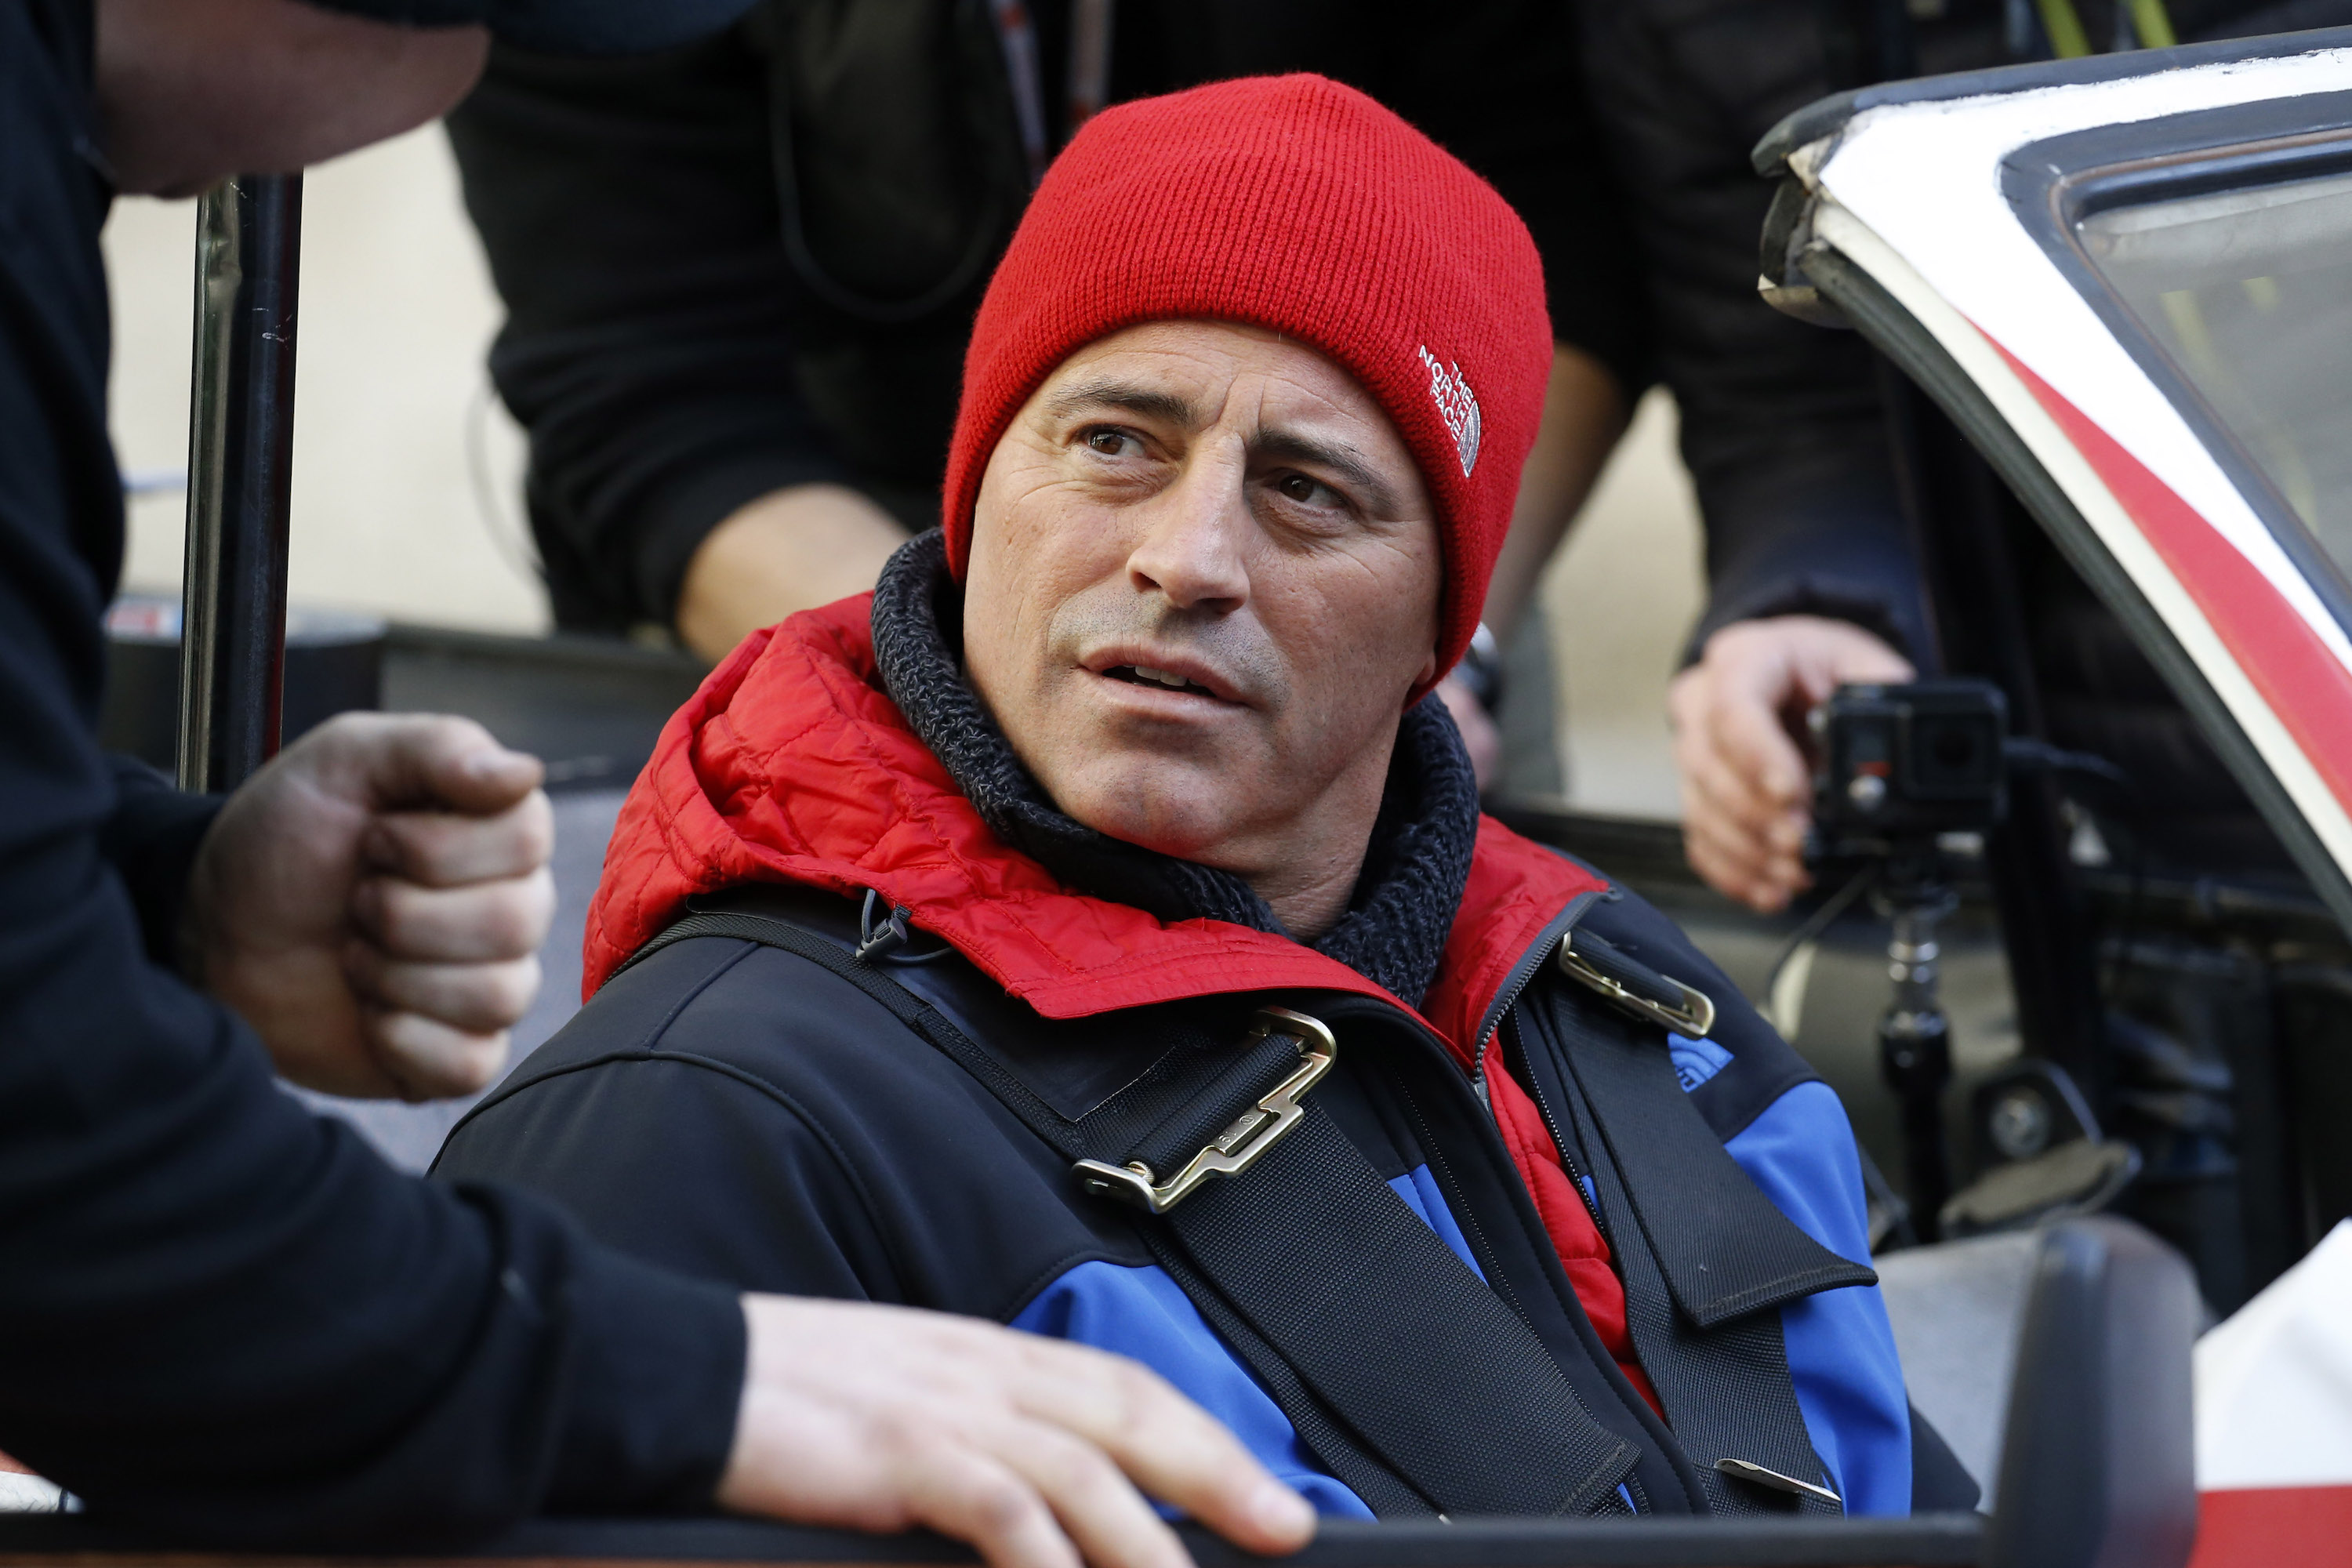 After Matt LeBlanc’s Exit, What’s Next for ‘Top Gear’?